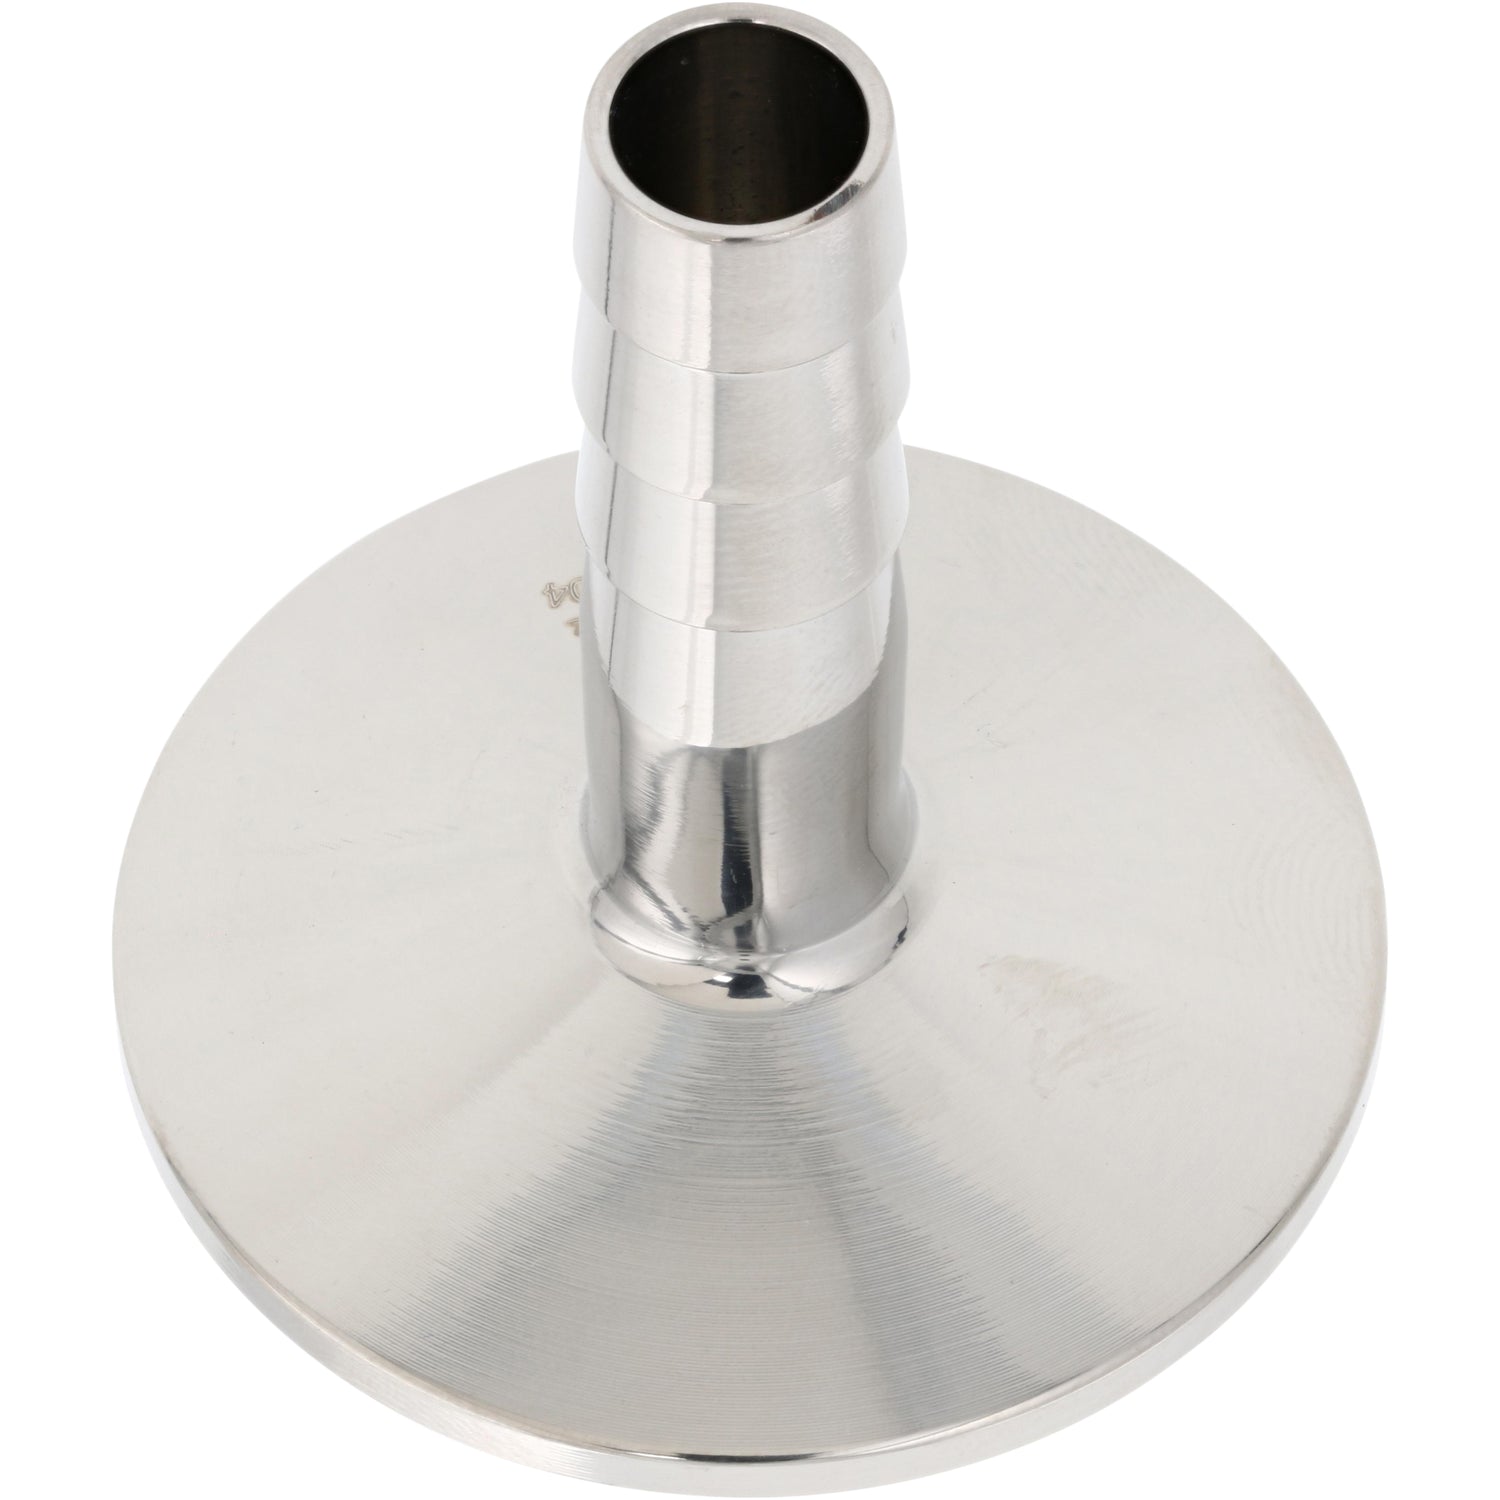 A stainless steel barbed pipe fitting with a central hole shown on a white background.